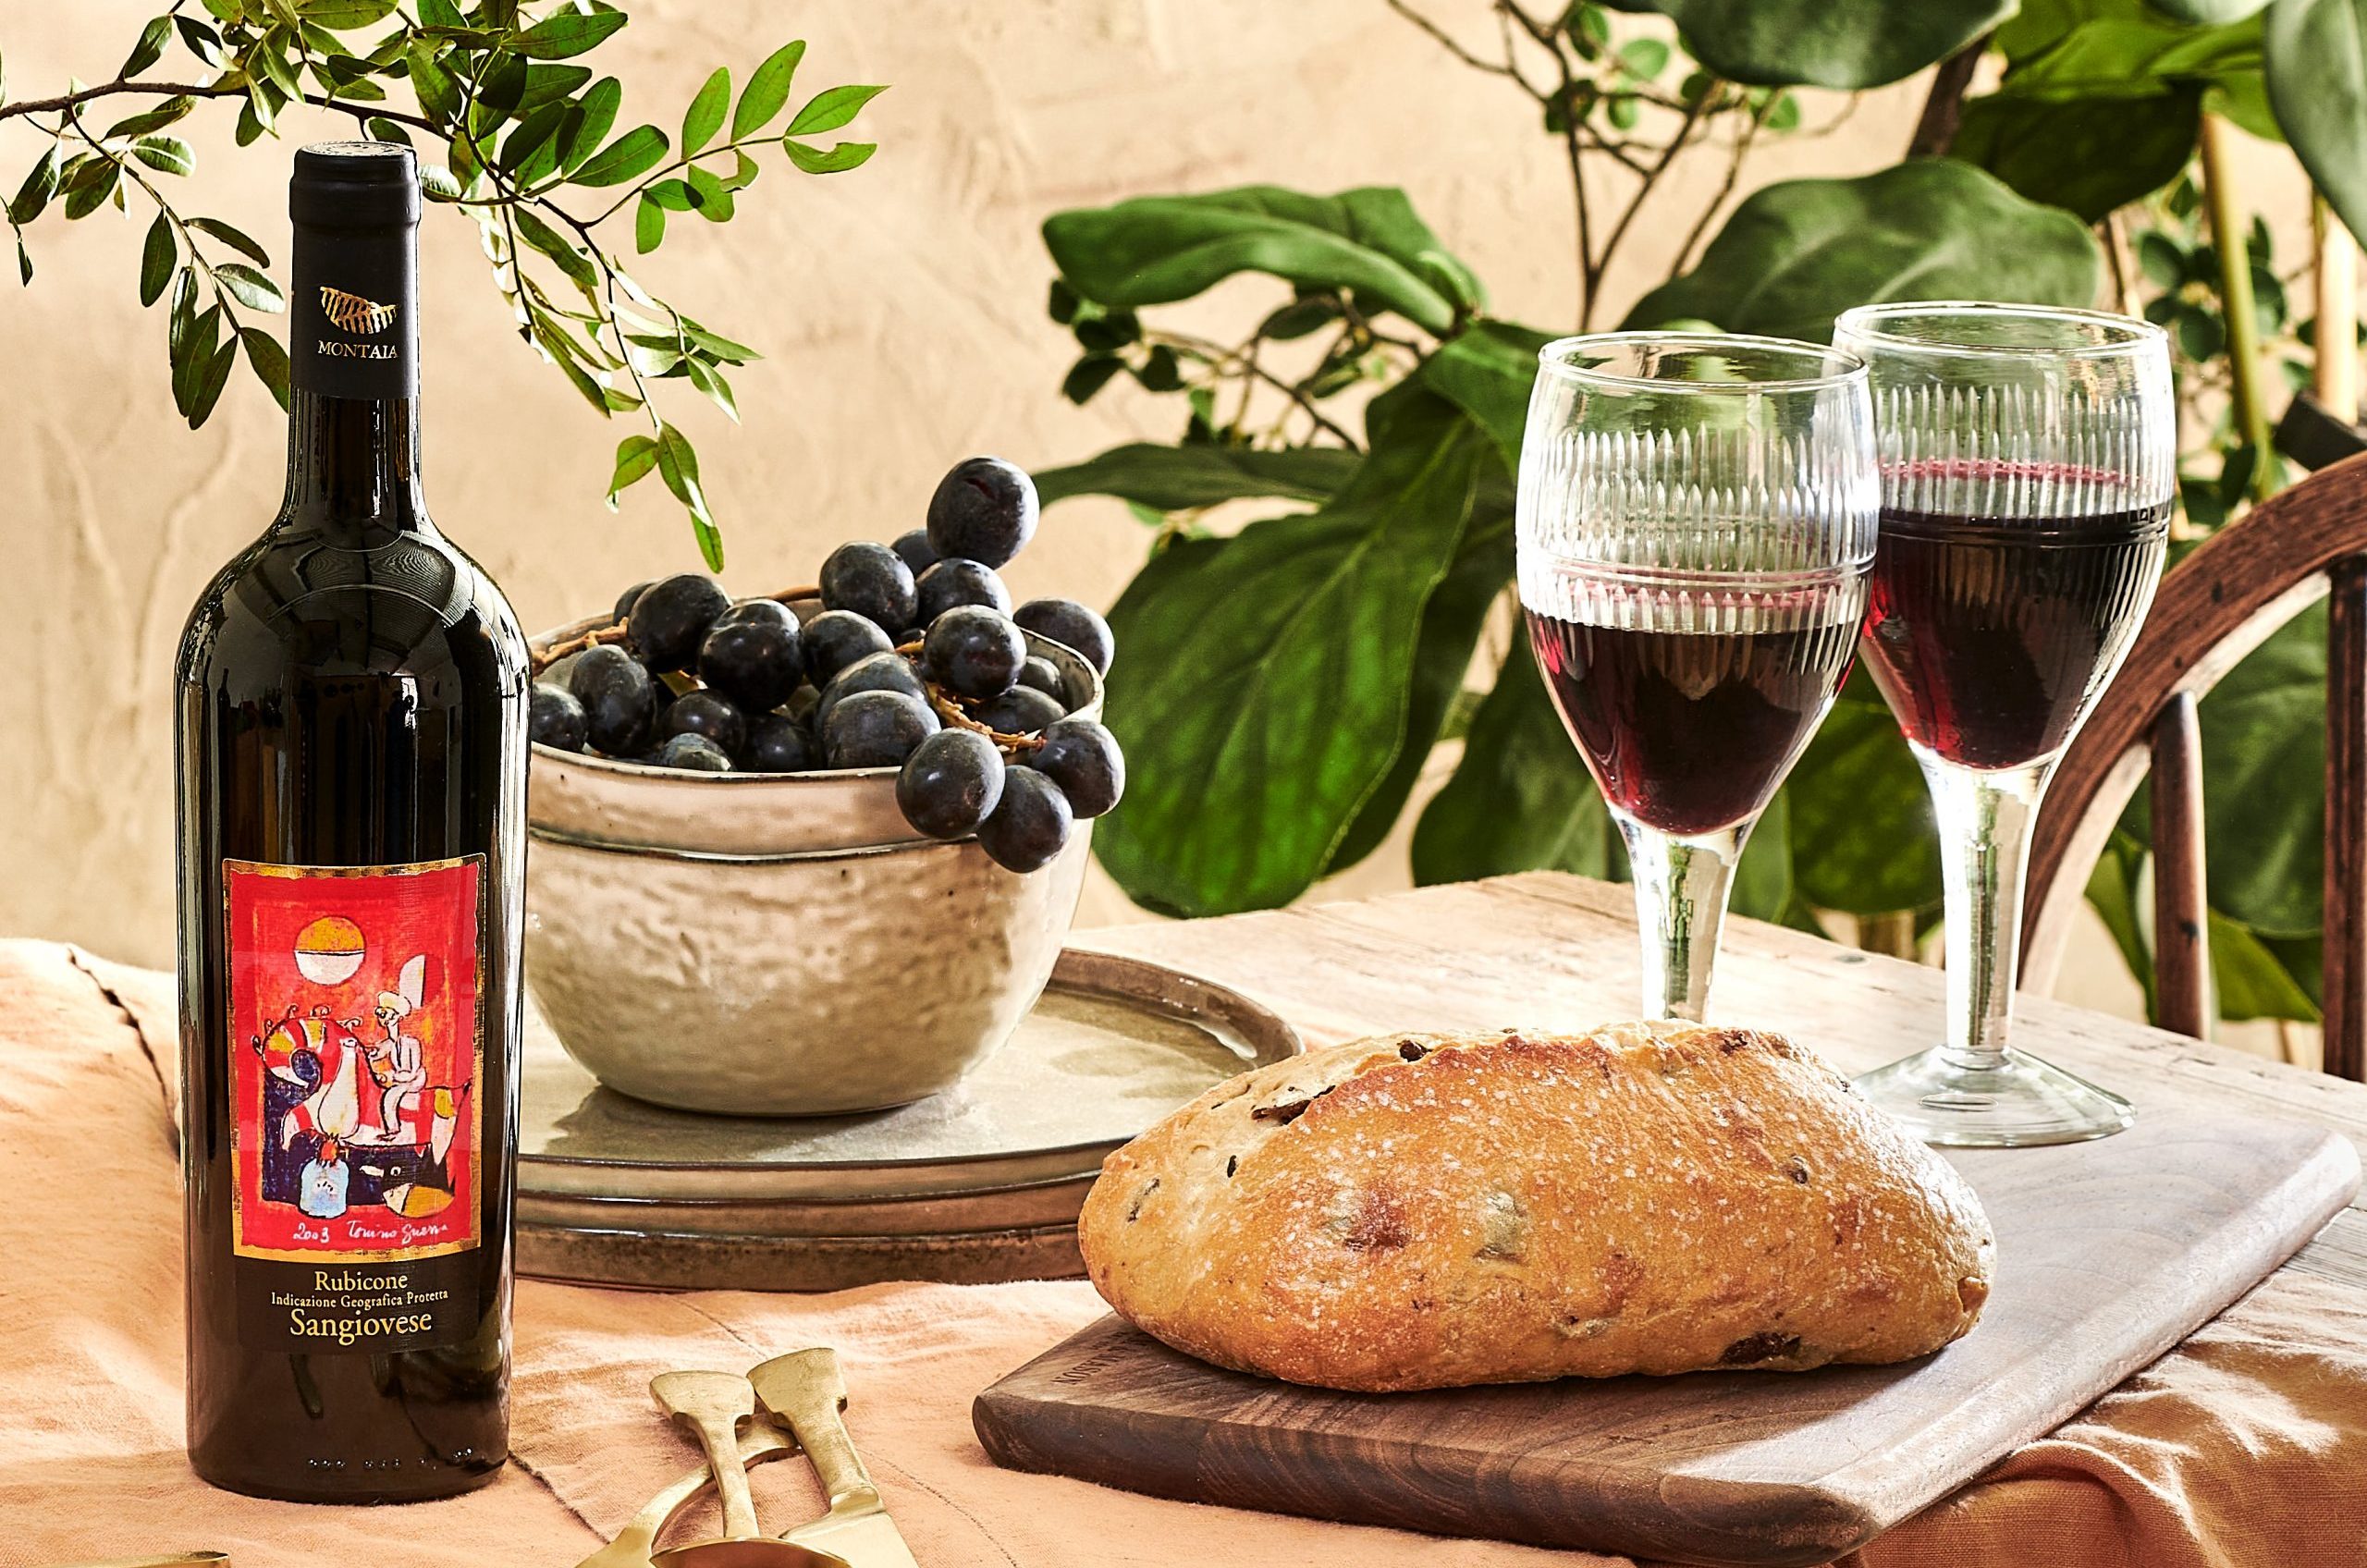 Wickhams' ‘The Garden of Italy’ wine showcased next to wine glasses, fresh baked bread and grapes.